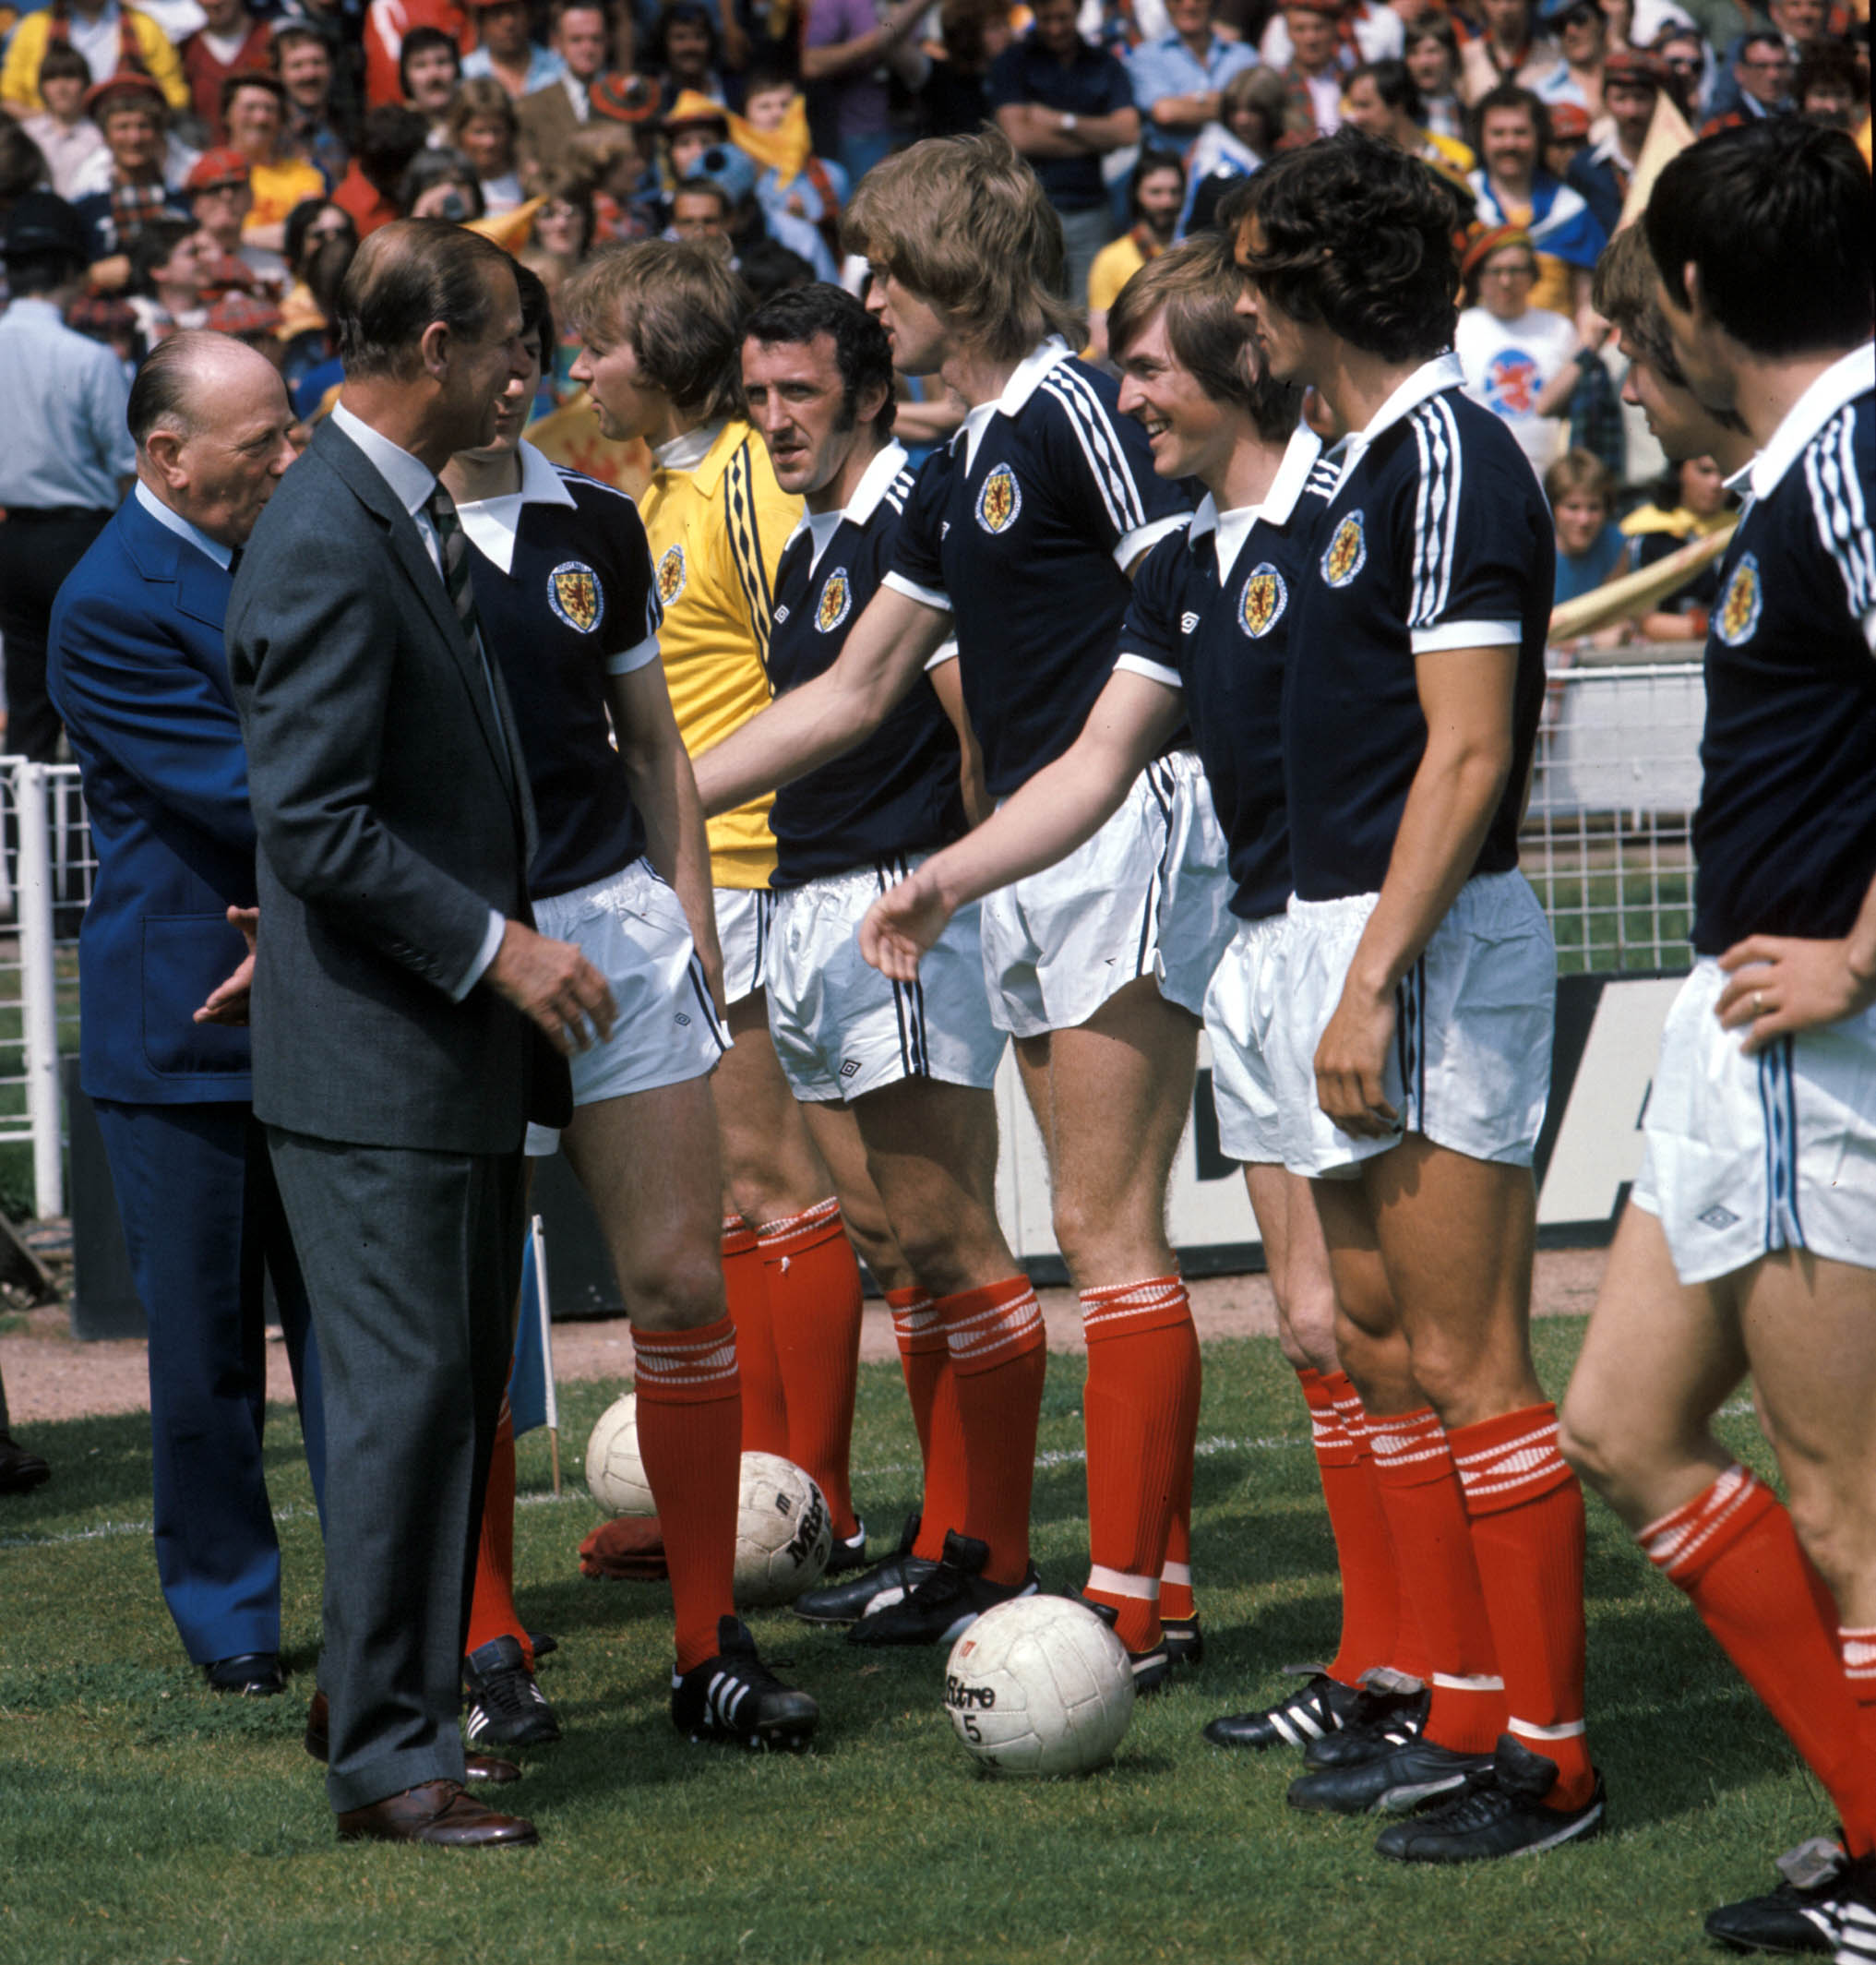 Prince Philip is introduced to (l-r) Danny McGrain, Gordon McQueen, Kenny Dalglish and Joe Jordon before Scotland beat England 2-1 at Wembley in 1977.